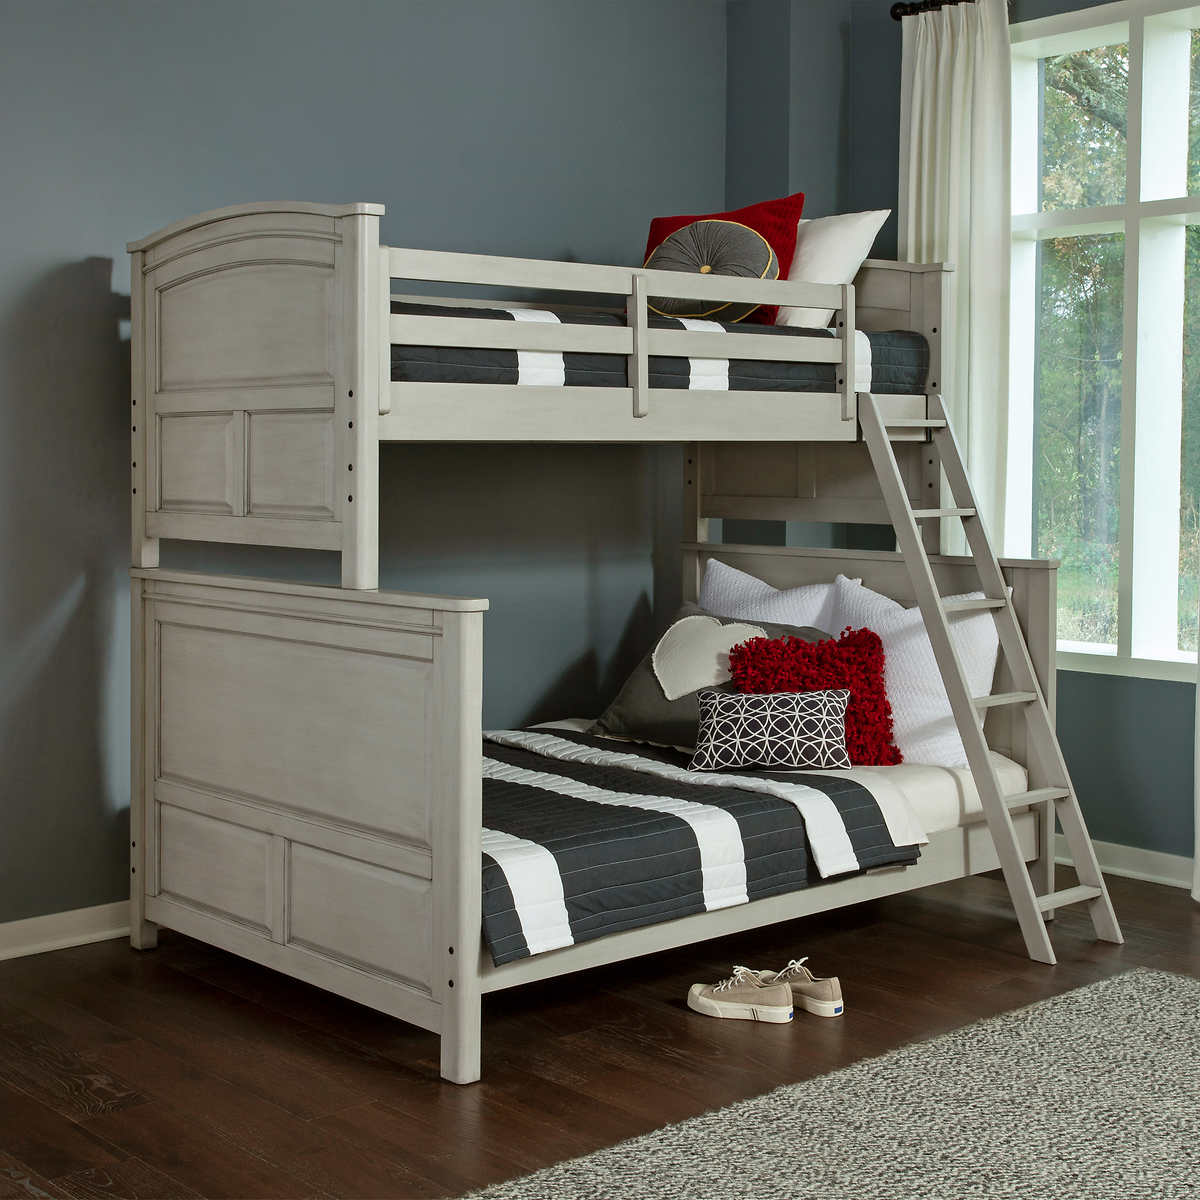 Wingate Twin Over Full Bunk Bed Costco, Your Zone Premium Twin Over Full Bunk Bed